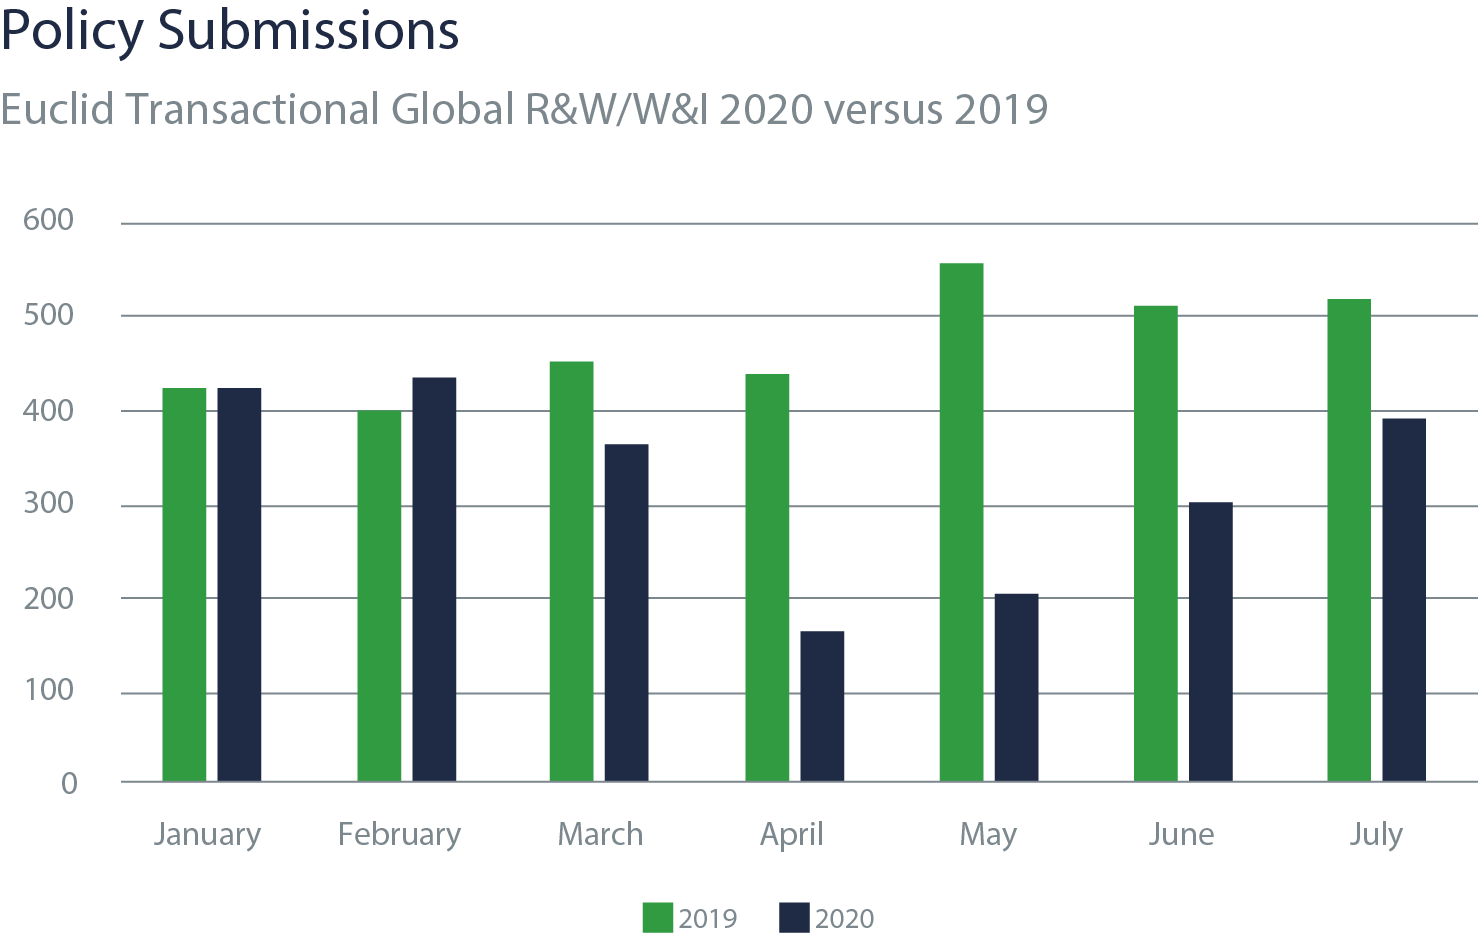 Policy submissions graphic showing Euclid Transactional Global R&W/W&I 2020 versus 2019